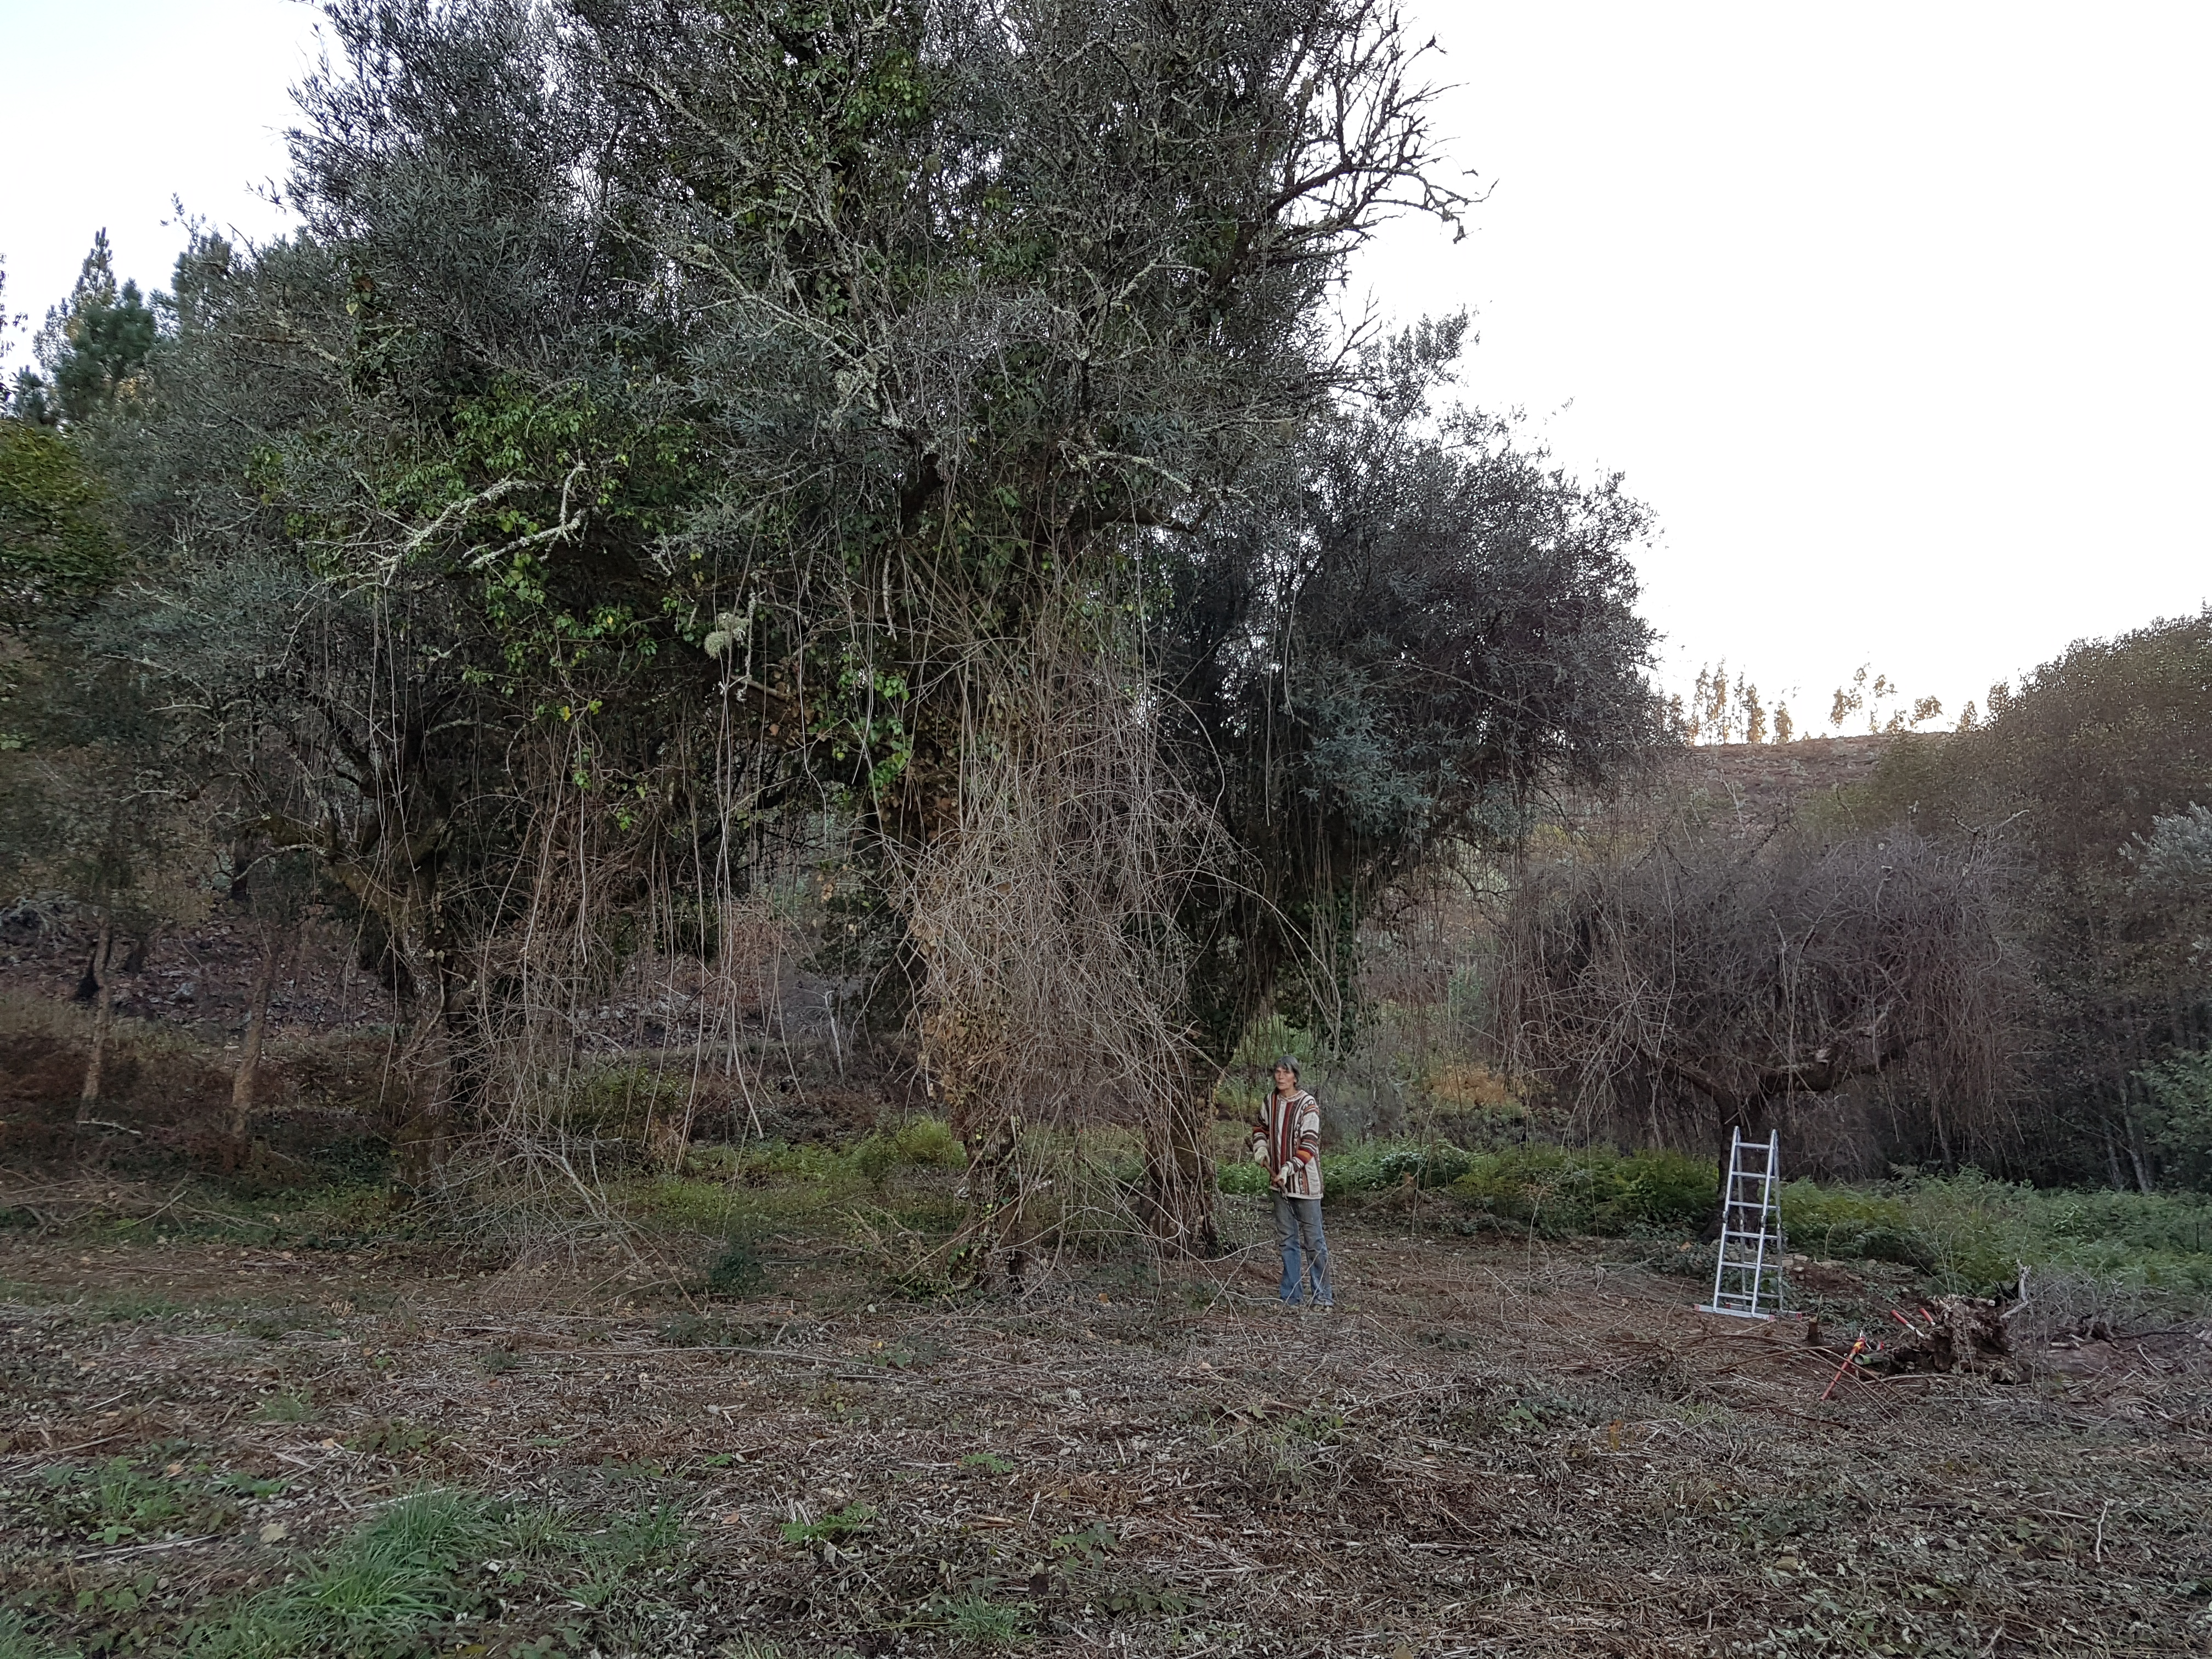 Annemarie is hacking away at the bramble branches that are making illegal use of their tall olive trees for support.